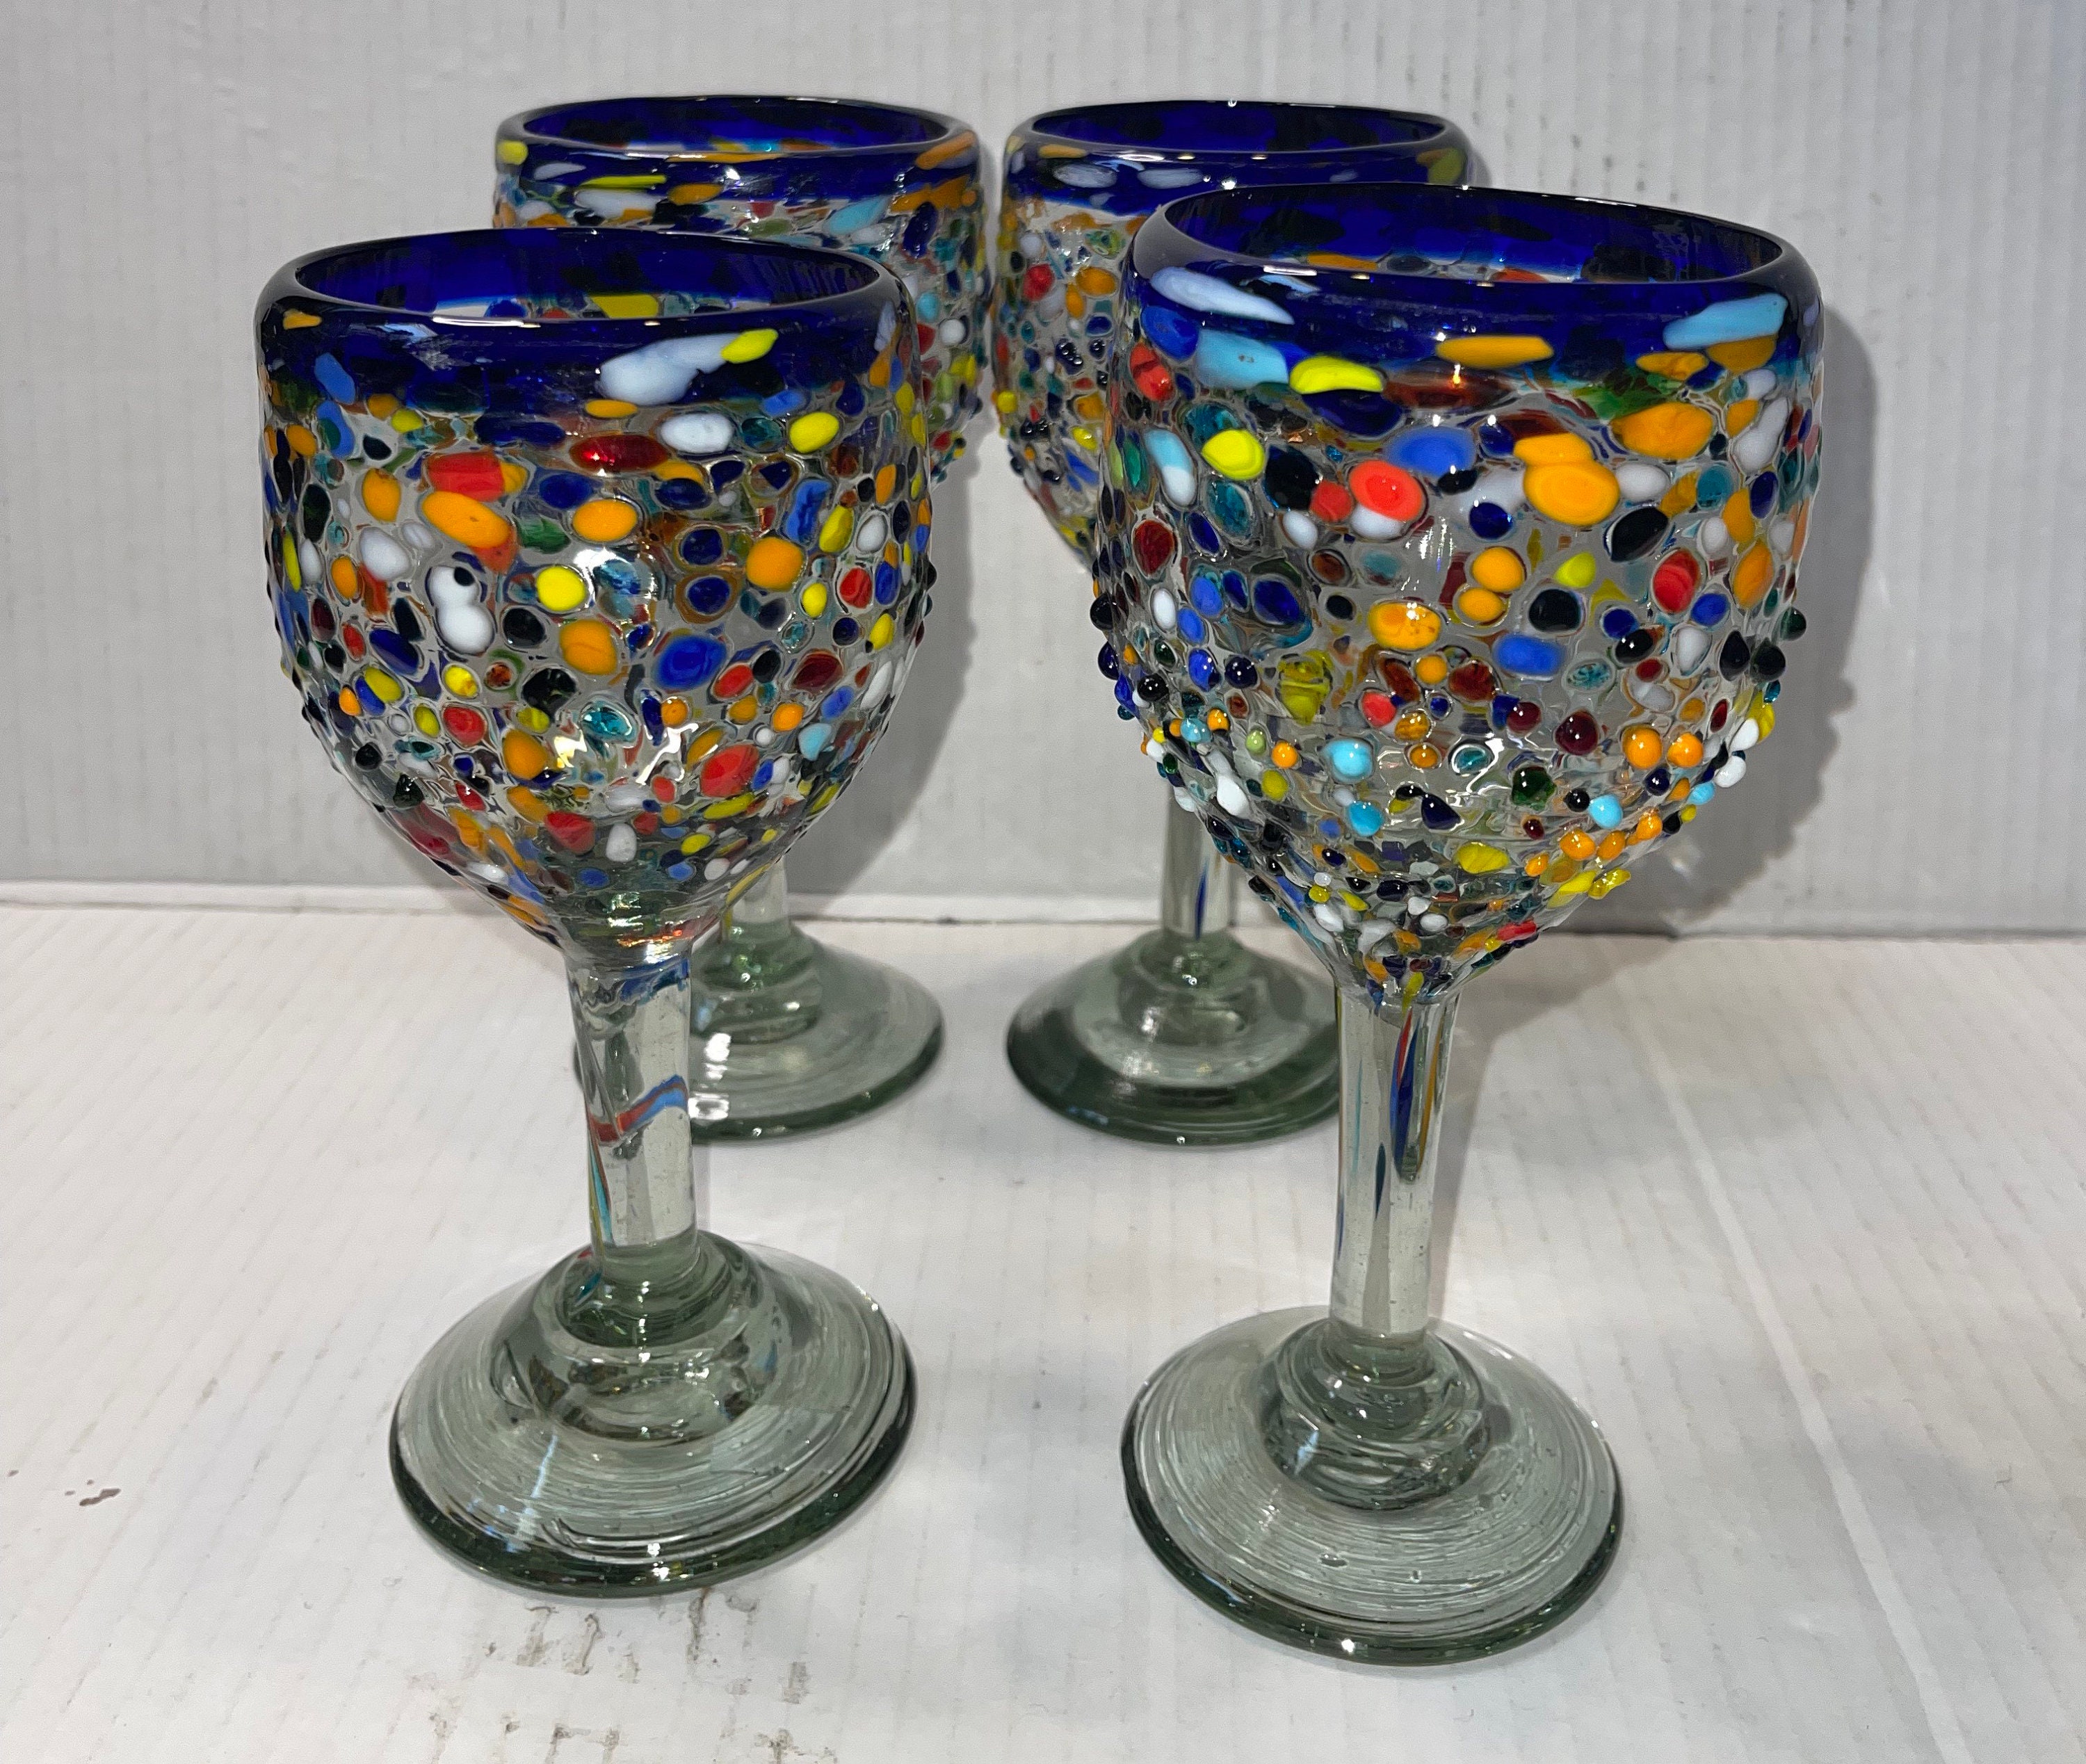 Hand Blown Mexican Stemless Wine Glasses - Set of 6 Glasses with Cobalt  Blue Rims 15 oz